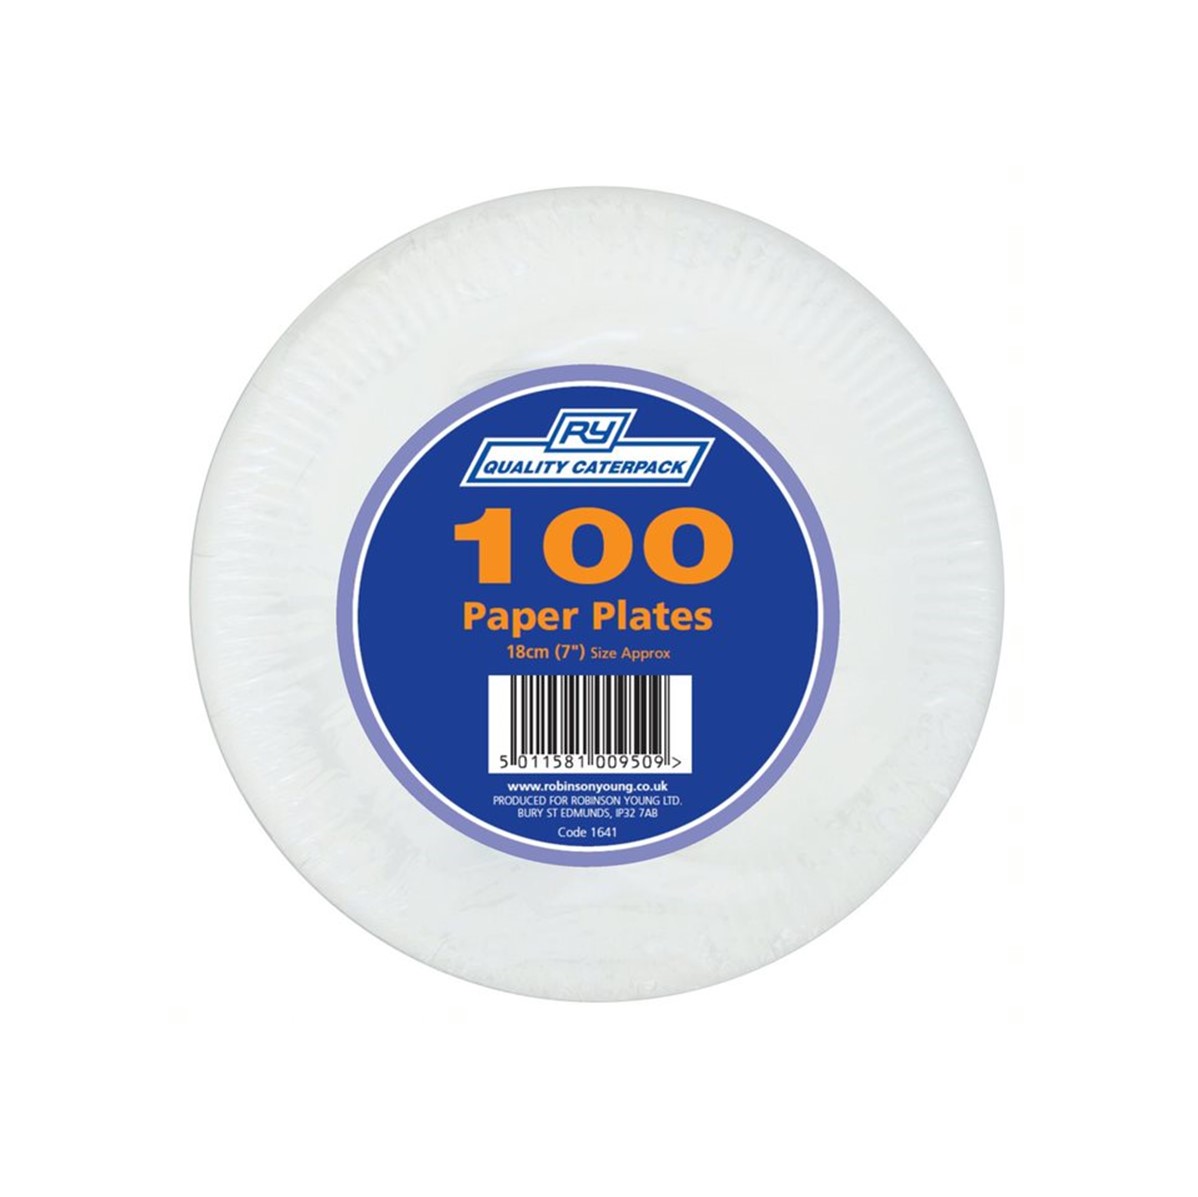 RY Caterpack Paper Plates - 100x18cm [7''] plates